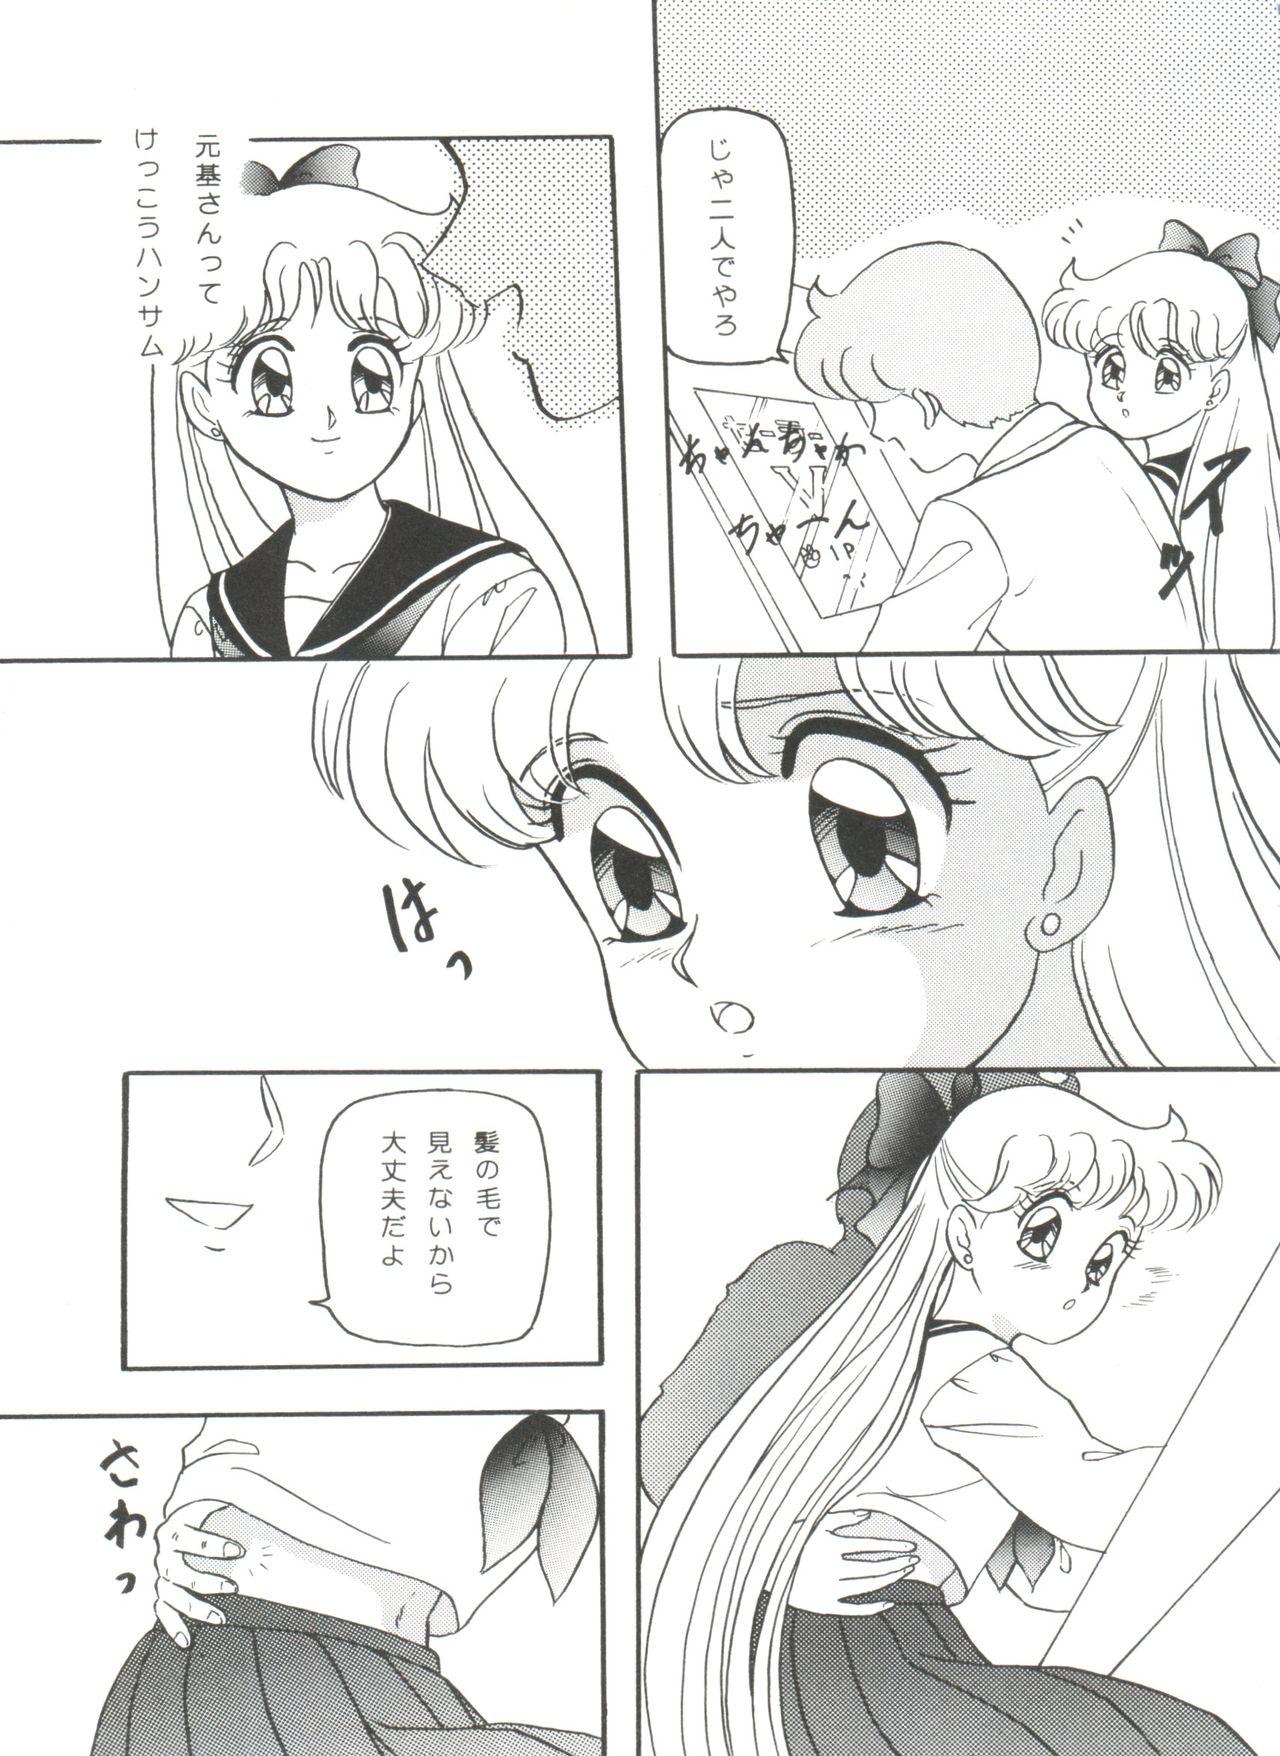 Pussyeating From the Moon - Sailor moon Free - Page 7